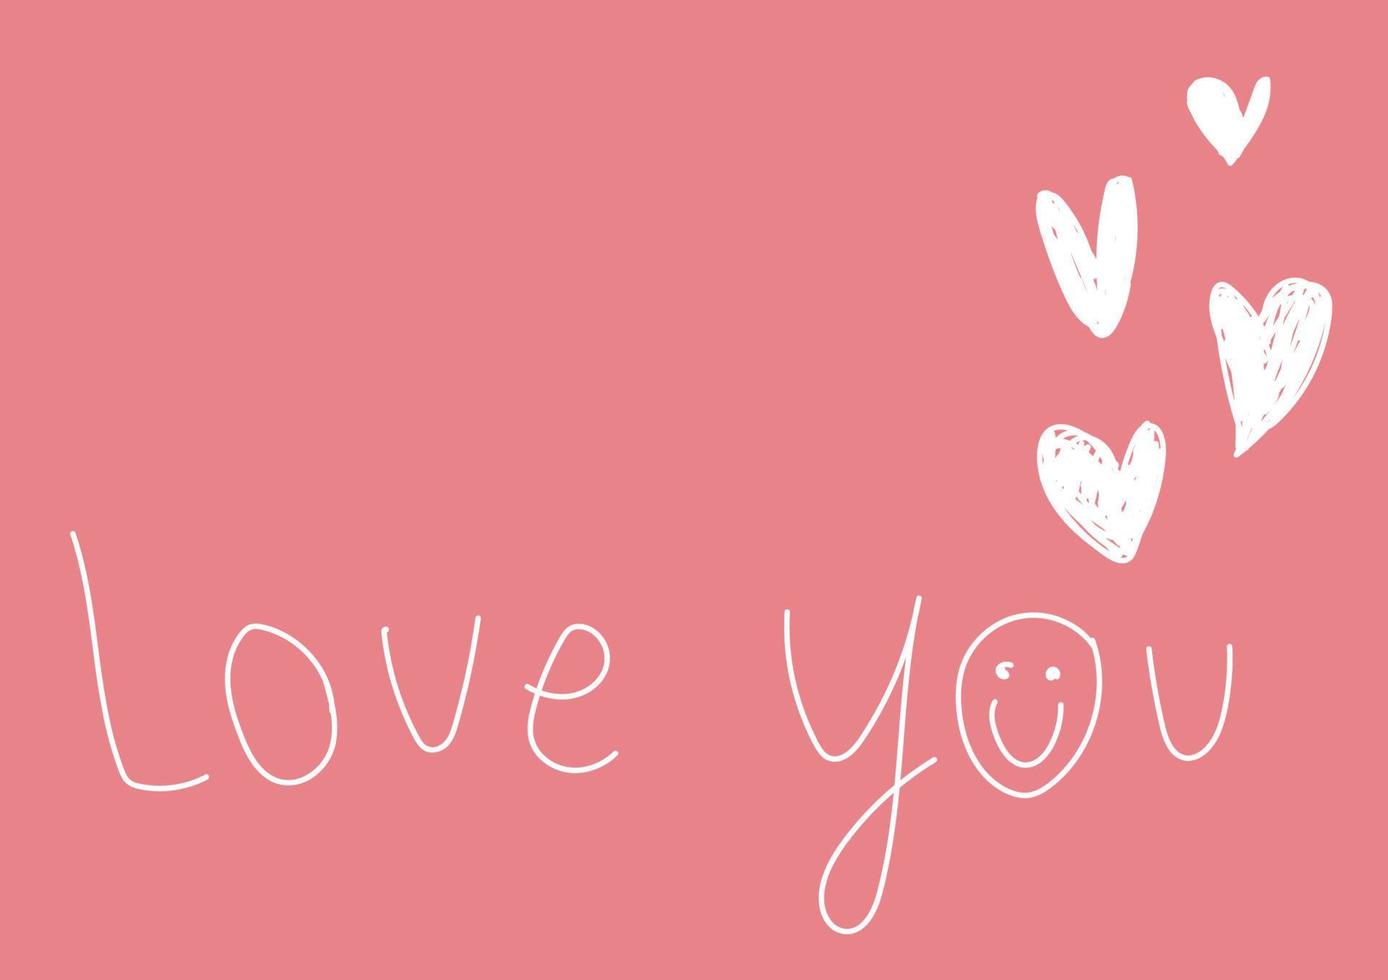 The letter Love You is white with a white heart on top. pink background vector